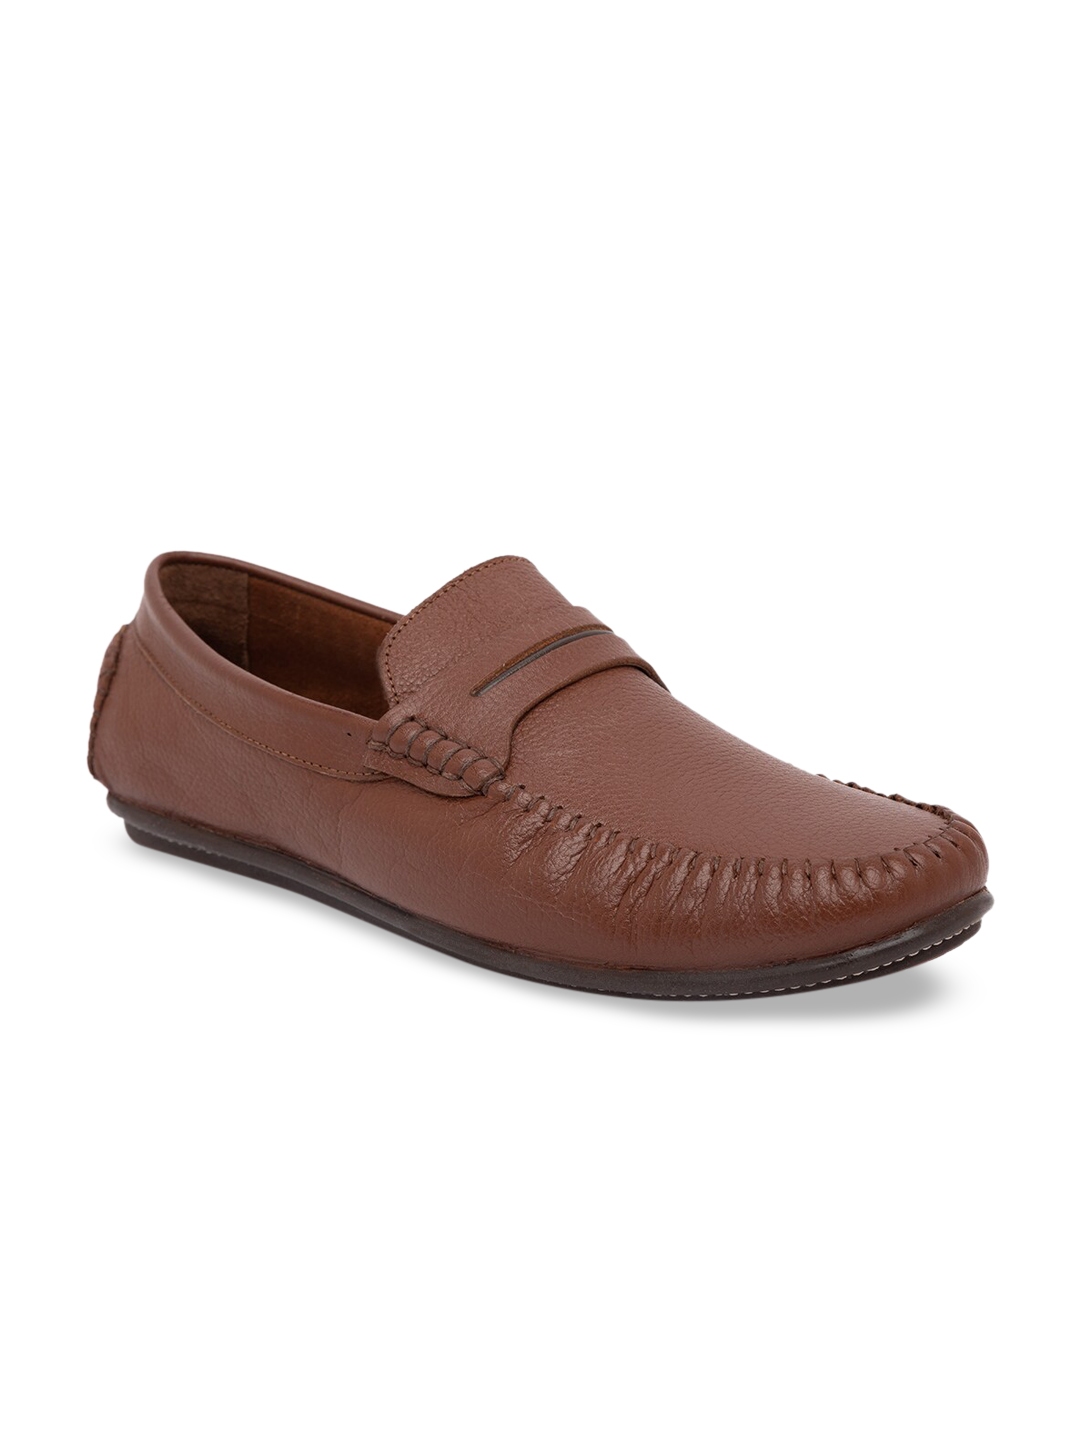 Buy Regal Men Brown Loafers - Casual Shoes for Men 13323402 | Myntra